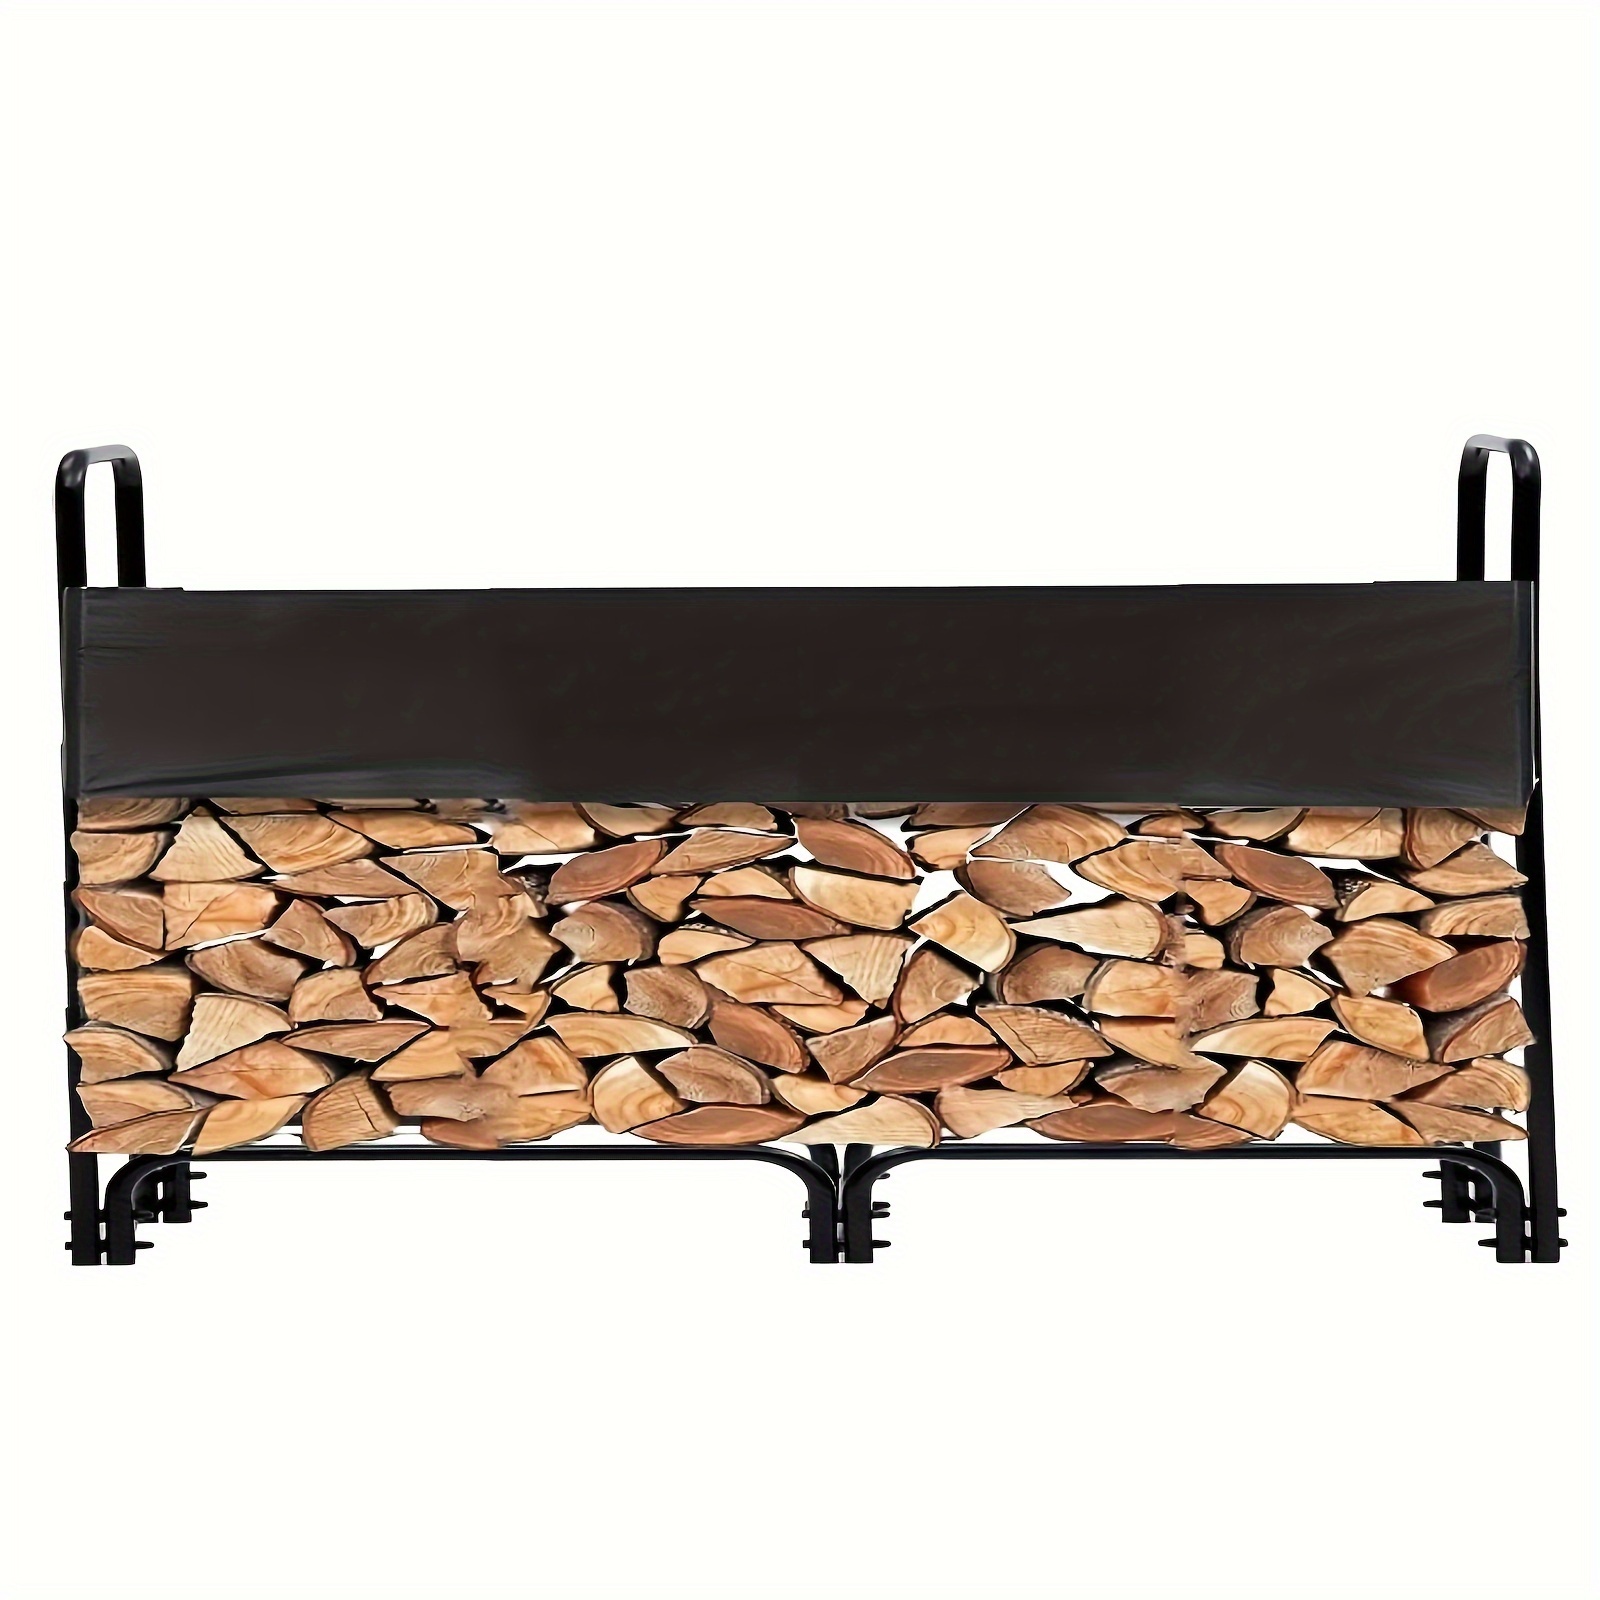 

Outdoor Firewood Rack With Cover, 8.5ft 1/2 Cord Of Firewood, Heavy Duty Firewood Holder & 600d Oxford Waterproof Cover For Outdoor Indoor Fireplace, Patio, Log Storage Rack For Firewood